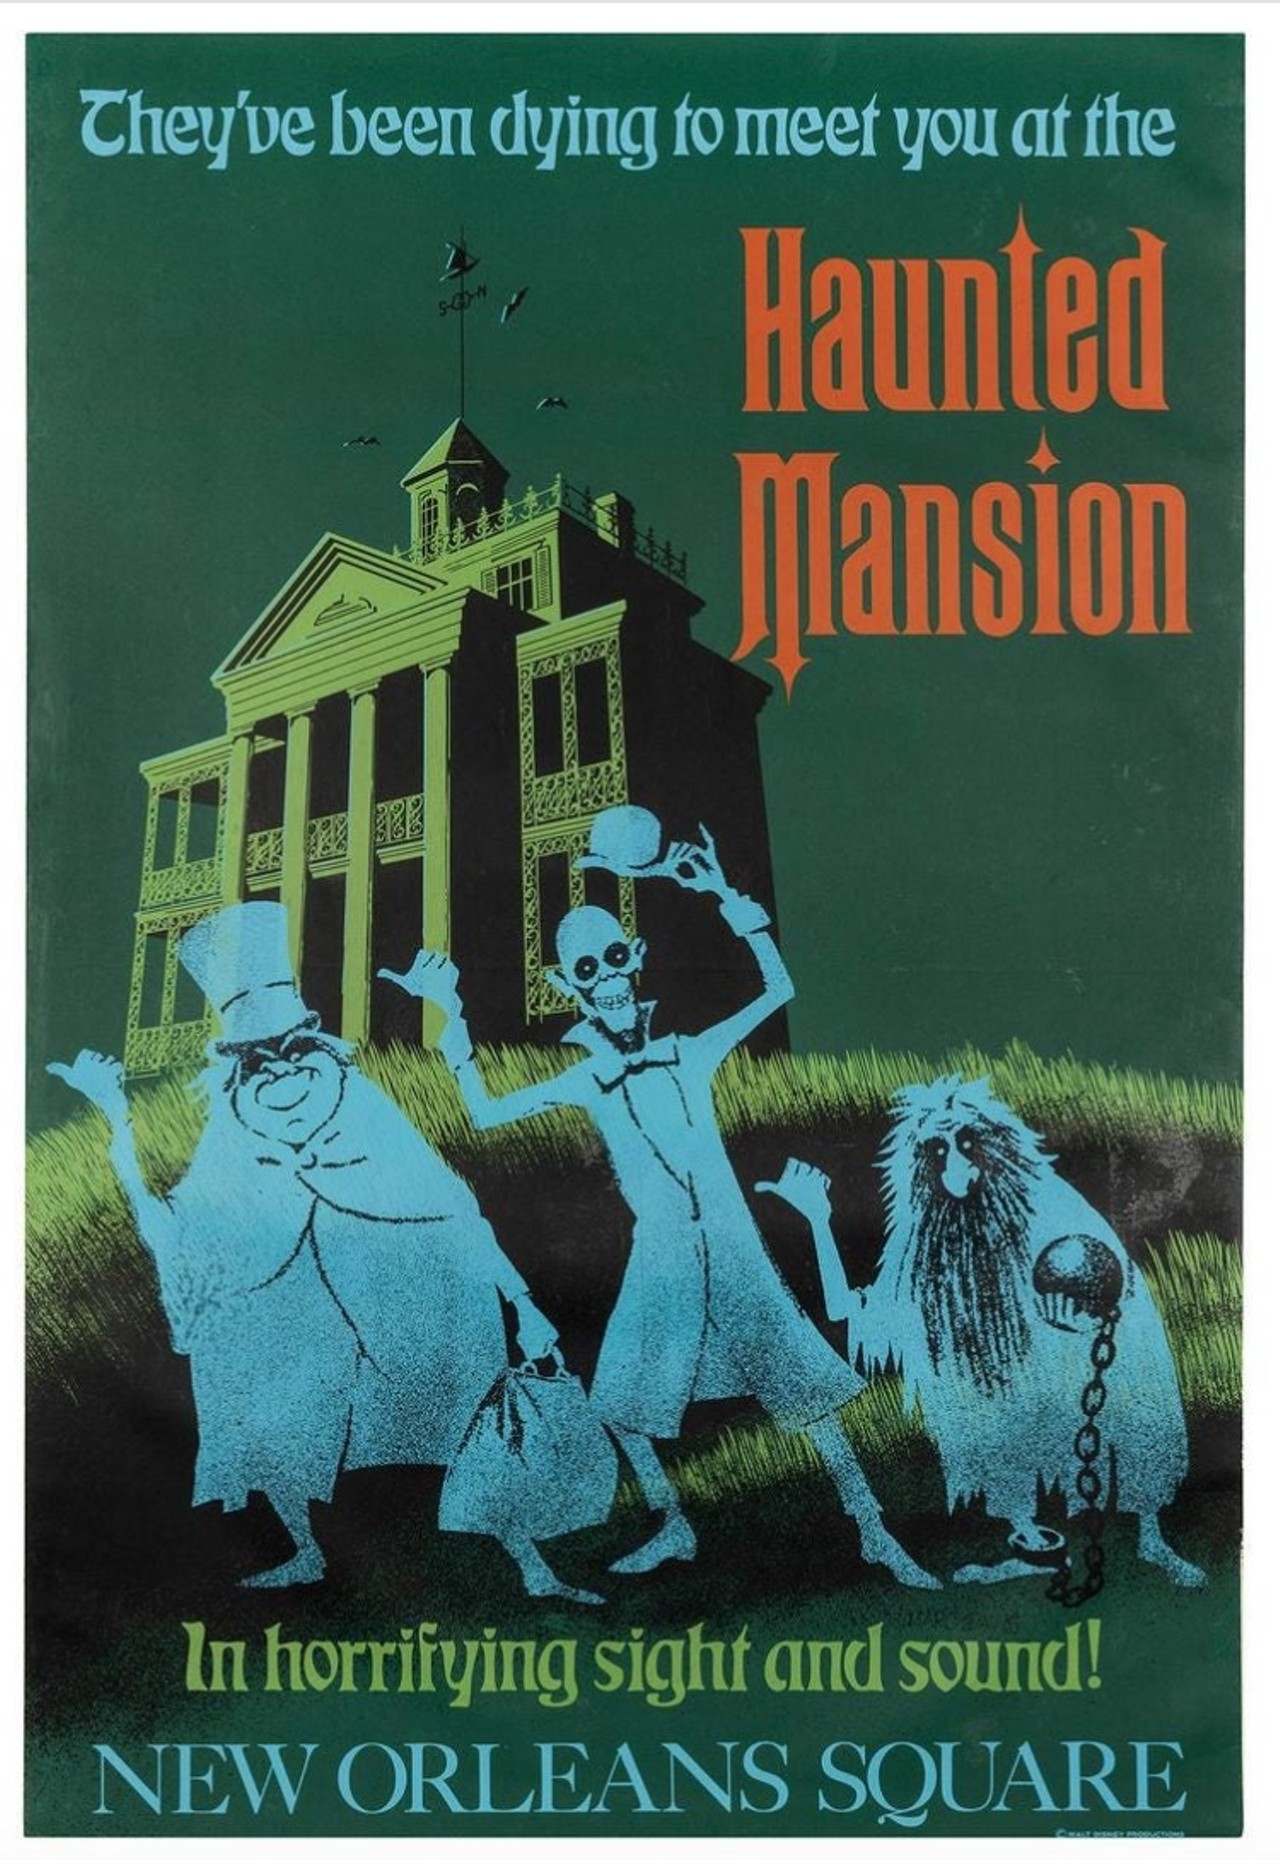 1969 Haunted Mansion/New Orleans Square Poster
Estimated Sale Price: $10,000-15,000 
A Disneyland poster designed by Ken Chapman and Marc Davis. This 54 x 36&#148; example features the hitchhiking ghosts in front of the Mansion and is signed by Marc Davis.